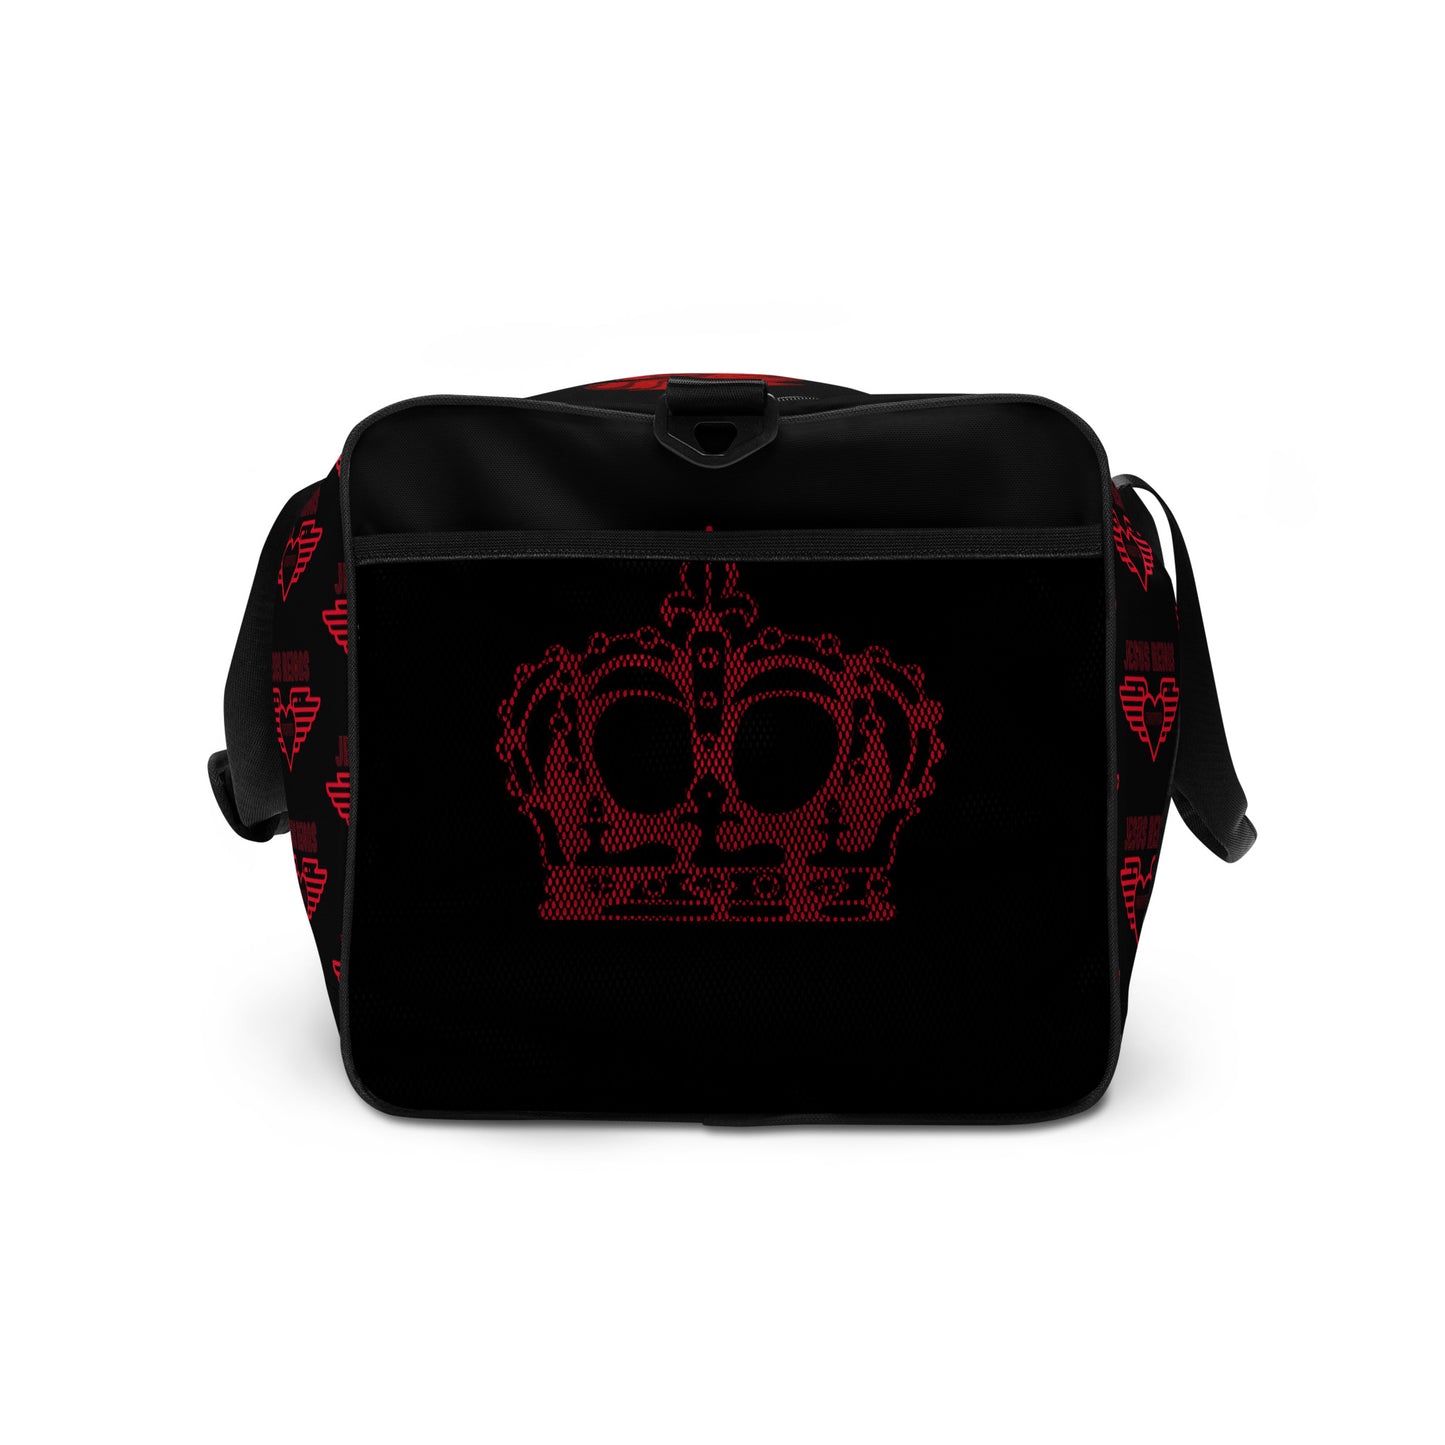 Jesus Reigns Forever- Duffle bag